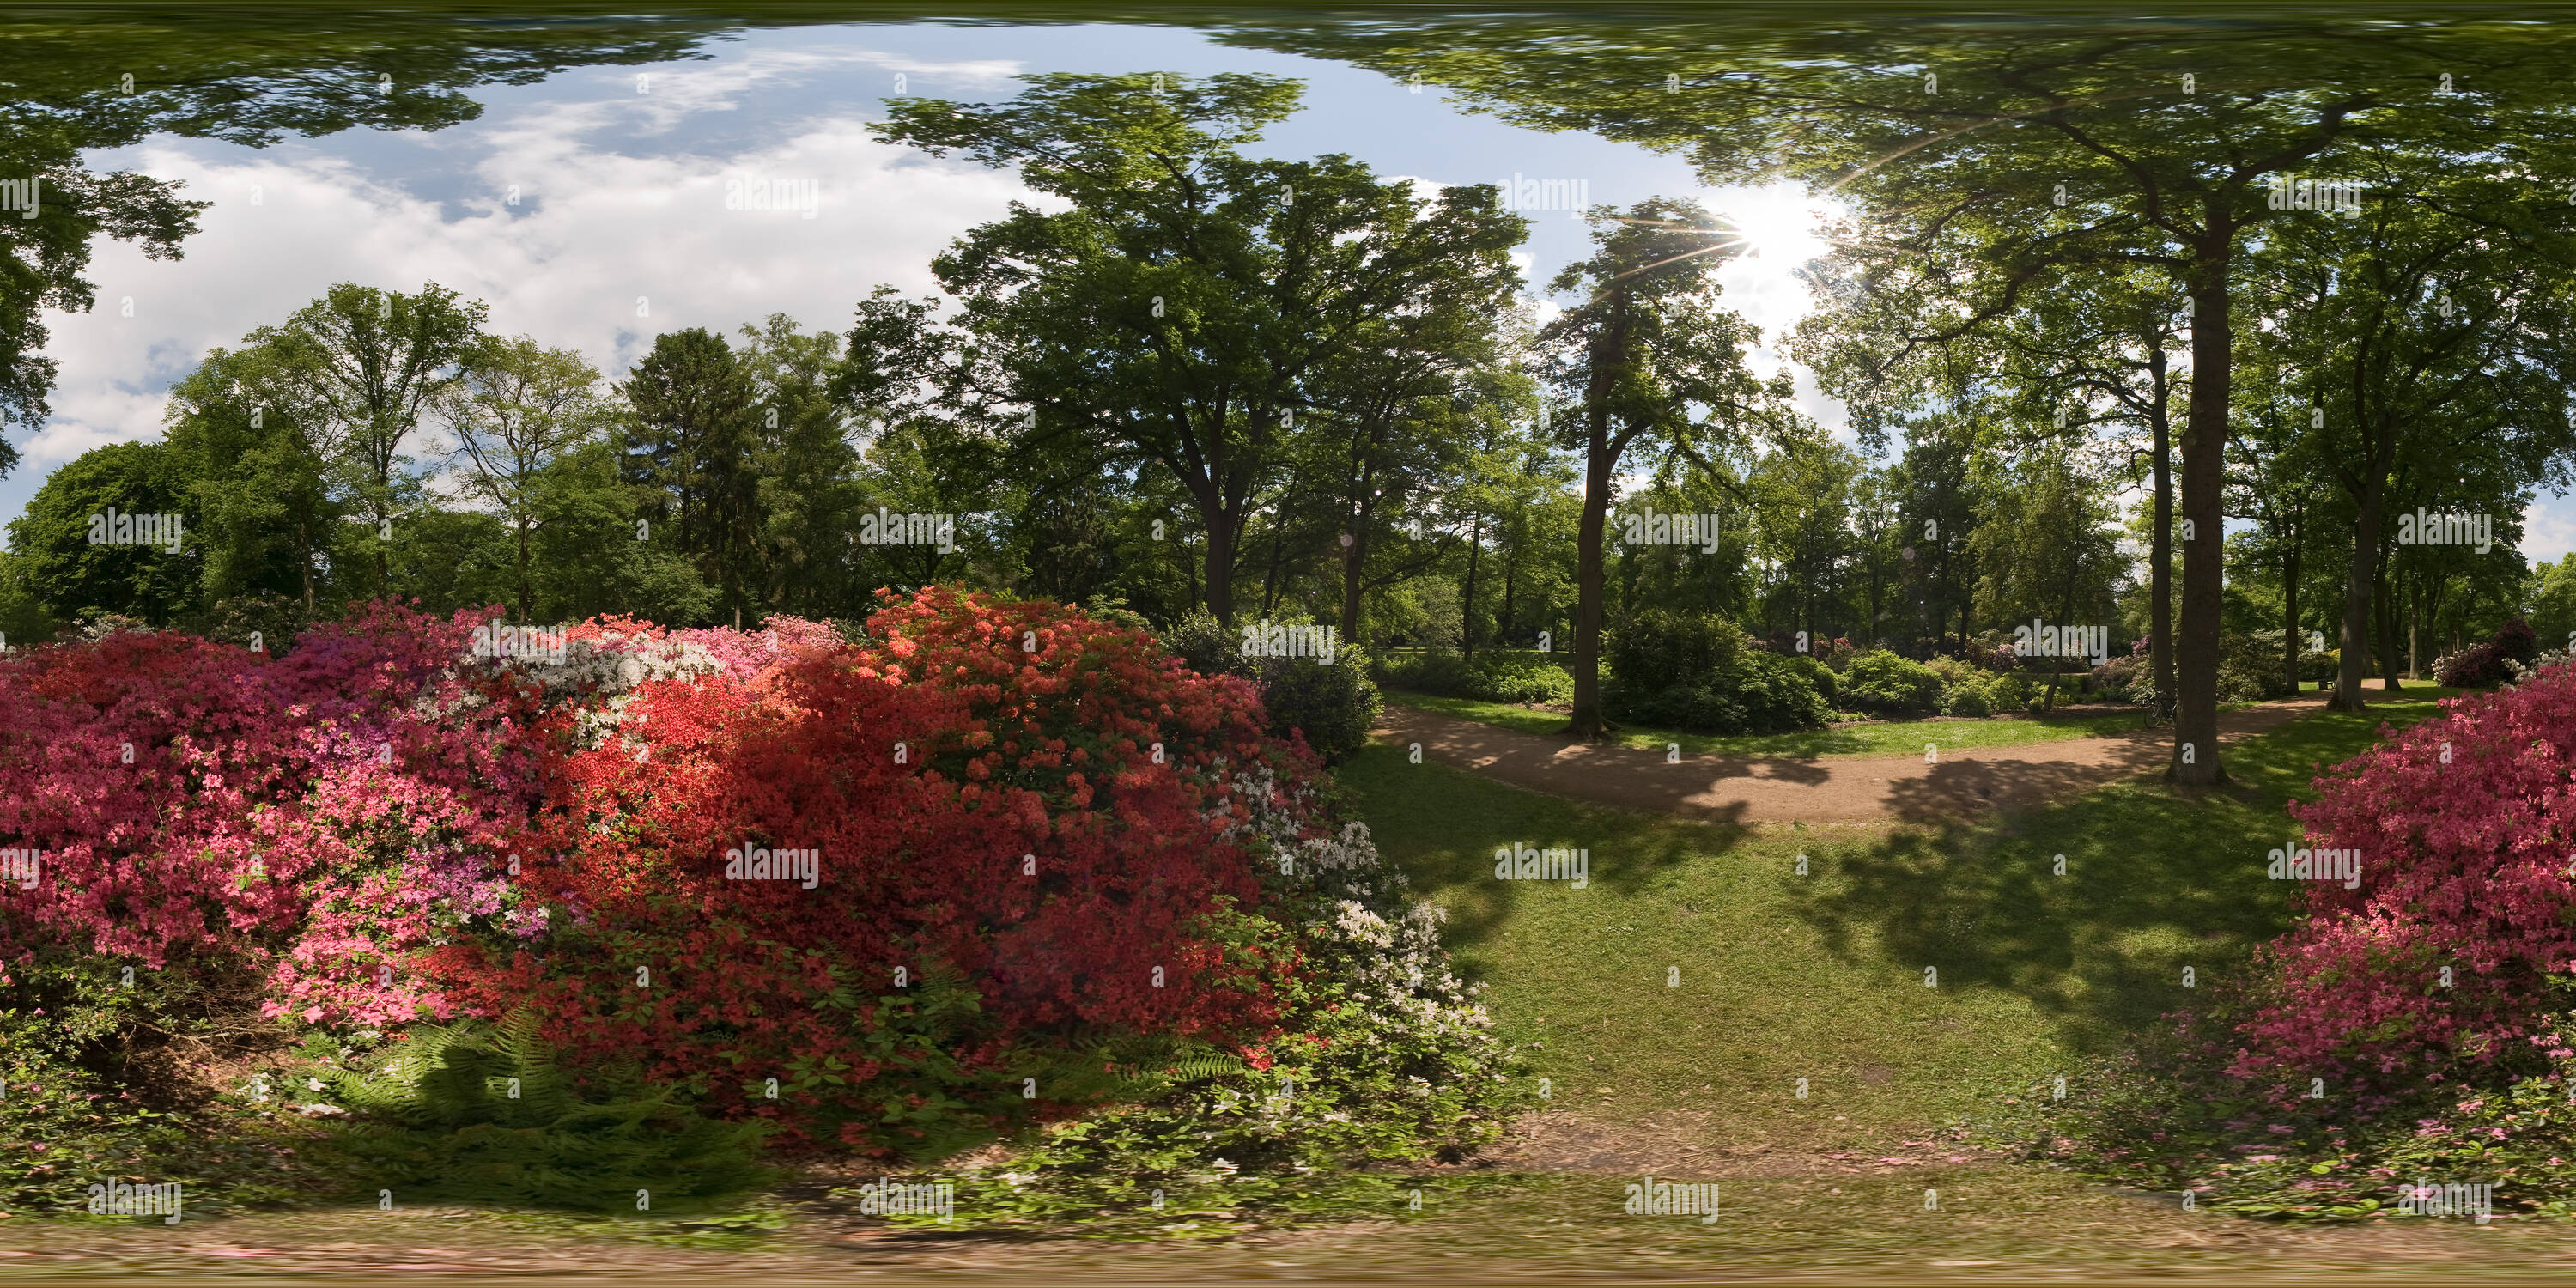 360 degree panoramic view of Rhododendron Park in Full Blossom